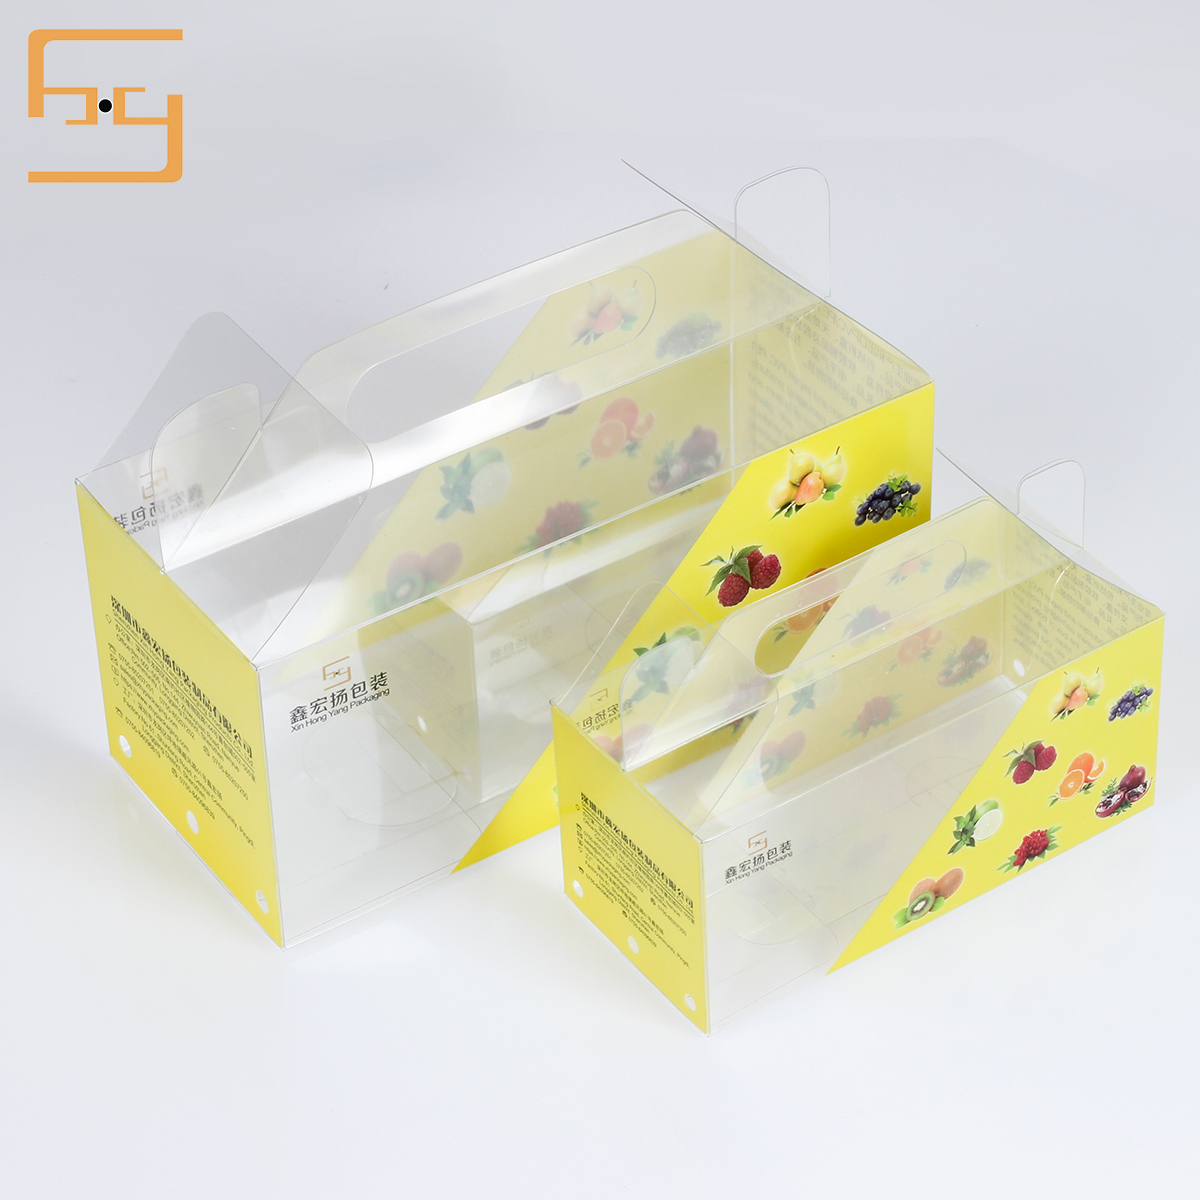 Hot Sale Transparent Printed Plastic PVC Box Package,Small Plastic Cosmetic box,PVC Packaging 3